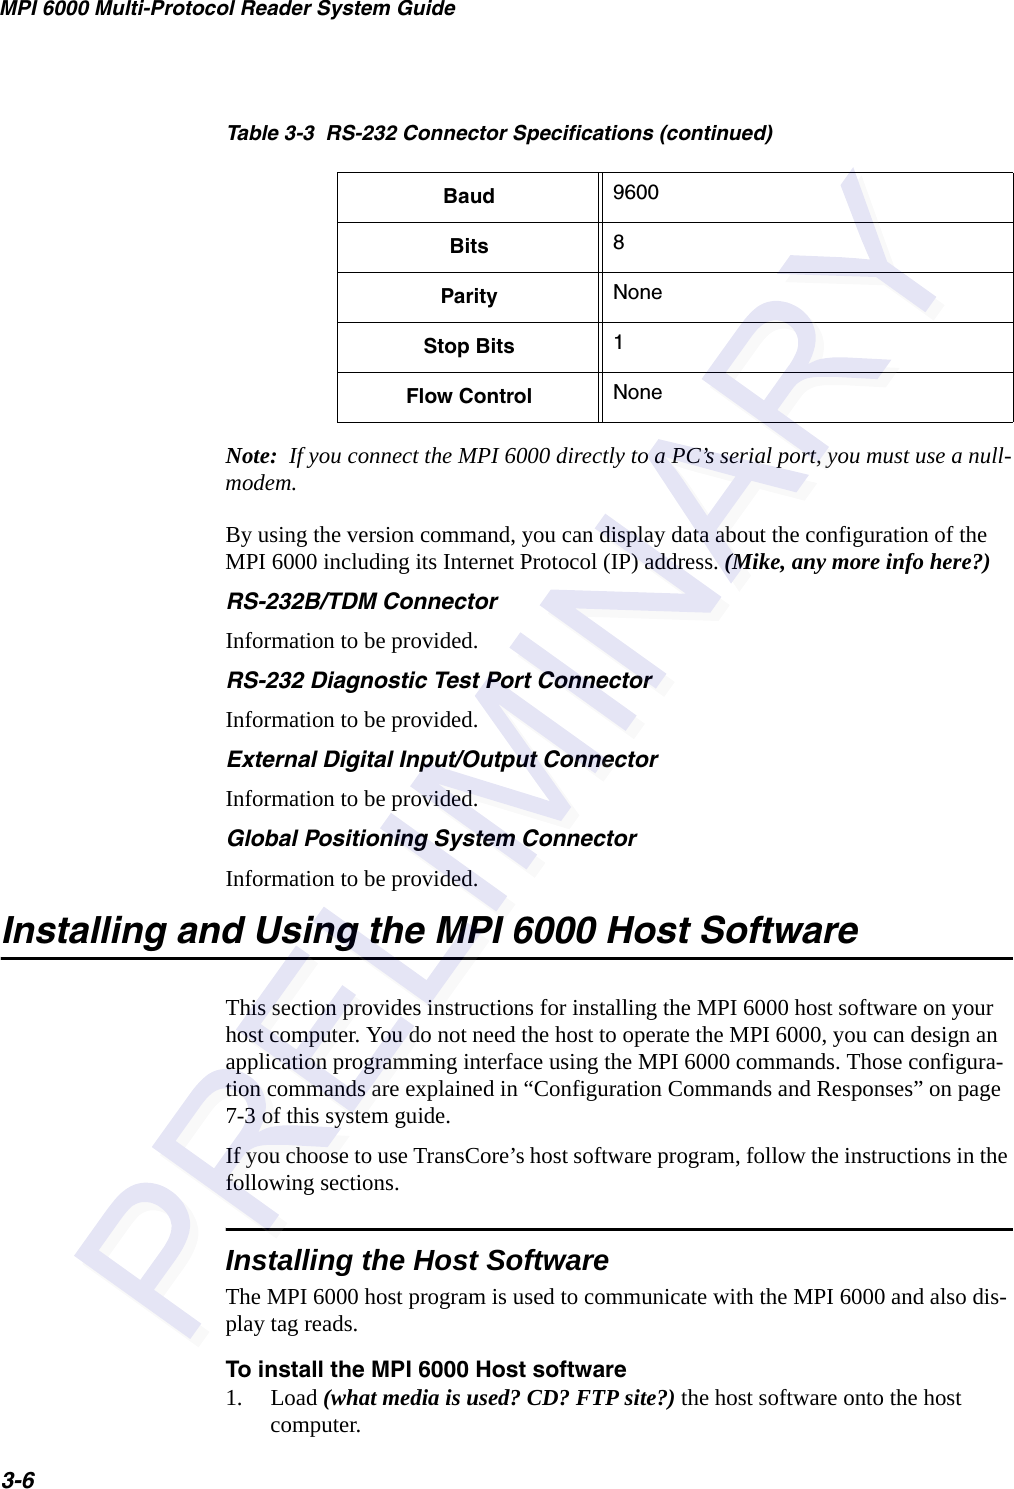 MPI 6000 Multi-Protocol Reader System Guide3-6Note:  If you connect the MPI 6000 directly to a PC’s serial port, you must use a null-modem.By using the version command, you can display data about the configuration of the MPI 6000 including its Internet Protocol (IP) address. (Mike, any more info here?)RS-232B/TDM ConnectorInformation to be provided. RS-232 Diagnostic Test Port ConnectorInformation to be provided.External Digital Input/Output ConnectorInformation to be provided.Global Positioning System ConnectorInformation to be provided.Installing and Using the MPI 6000 Host SoftwareThis section provides instructions for installing the MPI 6000 host software on your host computer. You do not need the host to operate the MPI 6000, you can design an application programming interface using the MPI 6000 commands. Those configura-tion commands are explained in “Configuration Commands and Responses” on page 7-3 of this system guide.If you choose to use TransCore’s host software program, follow the instructions in the following sections.Installing the Host SoftwareThe MPI 6000 host program is used to communicate with the MPI 6000 and also dis-play tag reads.To install the MPI 6000 Host software1. Load (what media is used? CD? FTP site?) the host software onto the host computer. Baud 9600Bits 8Parity NoneStop Bits 1Flow Control NoneTable 3-3  RS-232 Connector Specifications (continued)